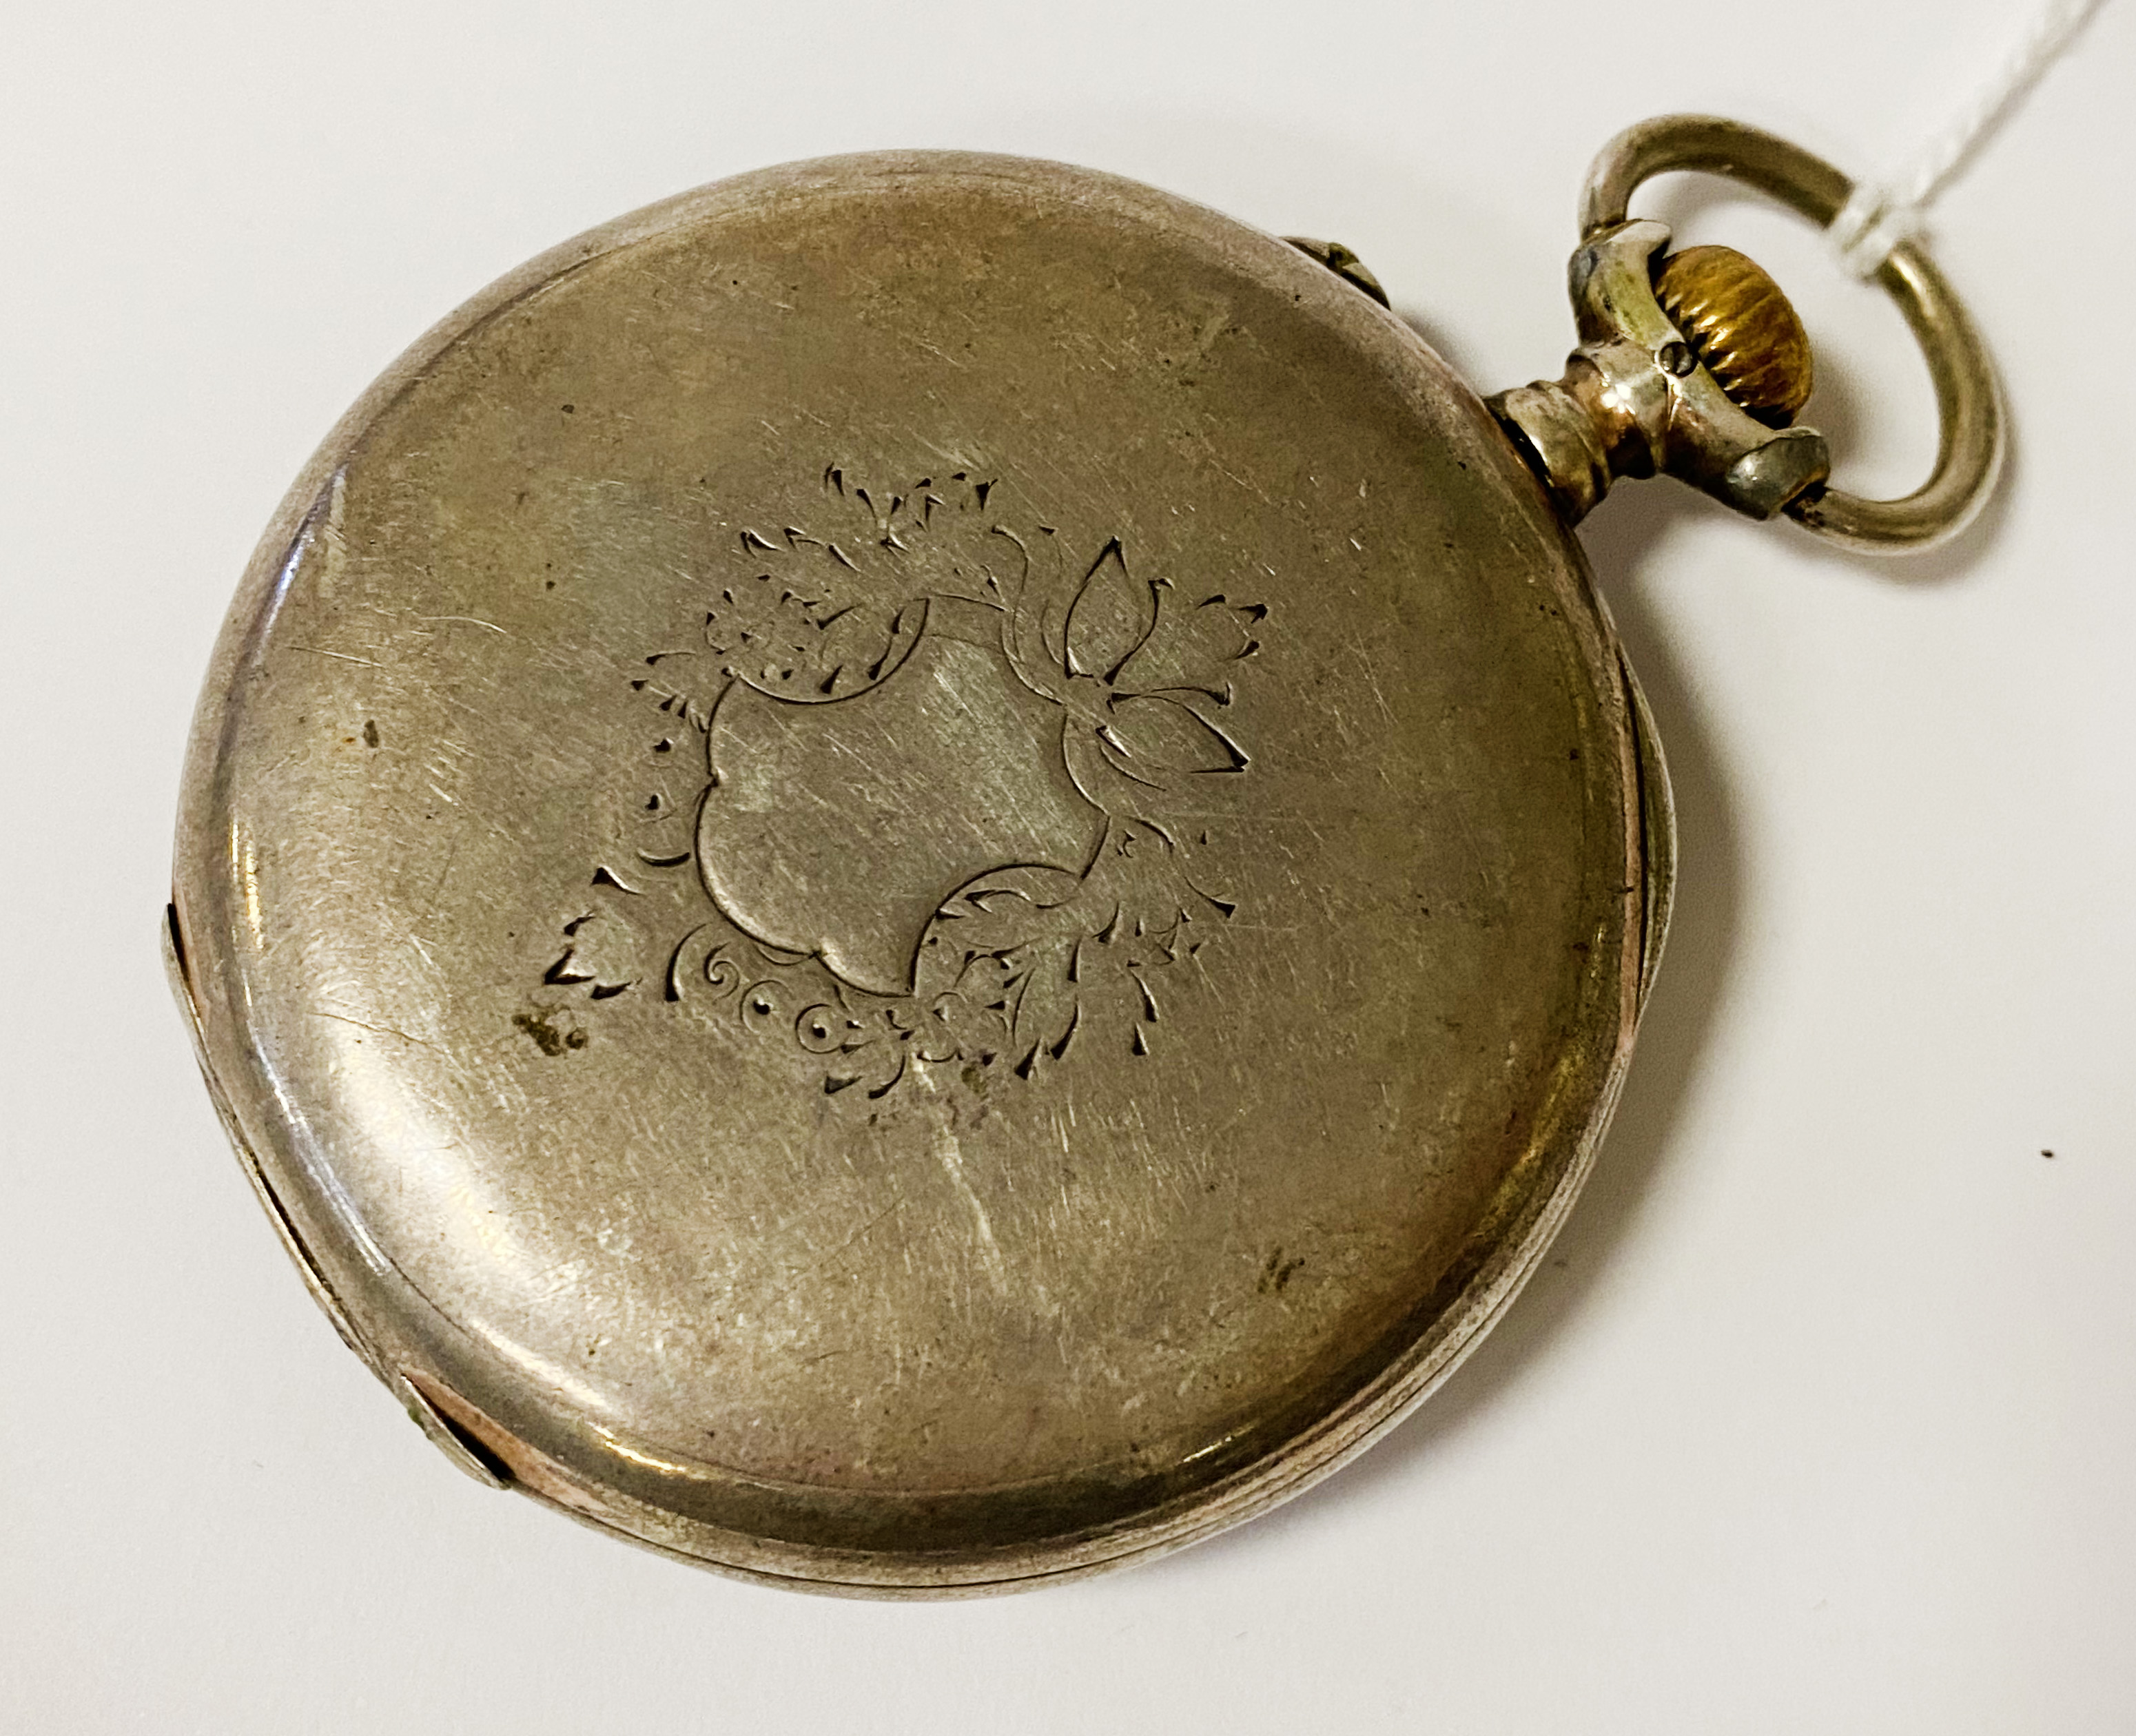 LONGINES SILVER POCKET WATCH - Image 2 of 2